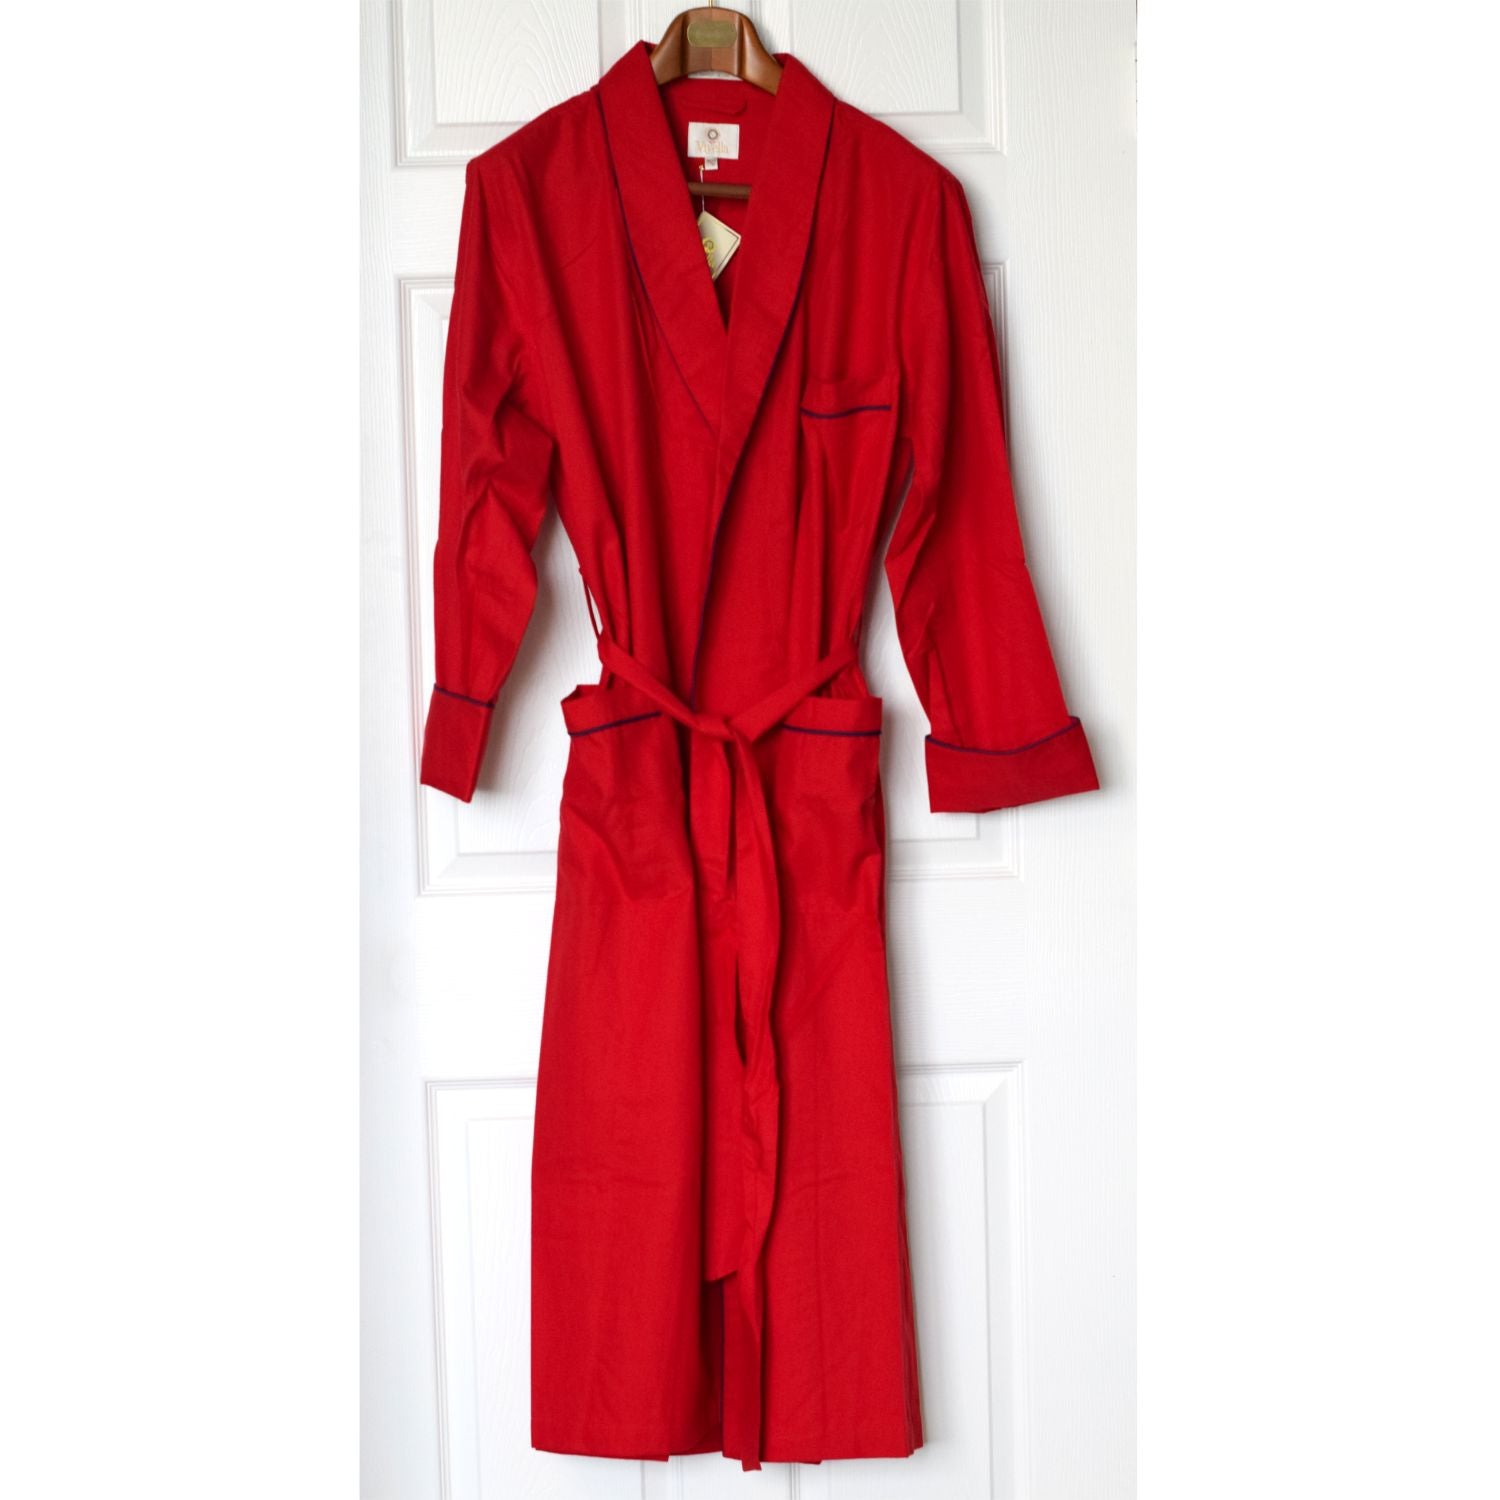 Gentleman's Cotton and Wool Blend Robe in Solid Red with Navy Piping b ...